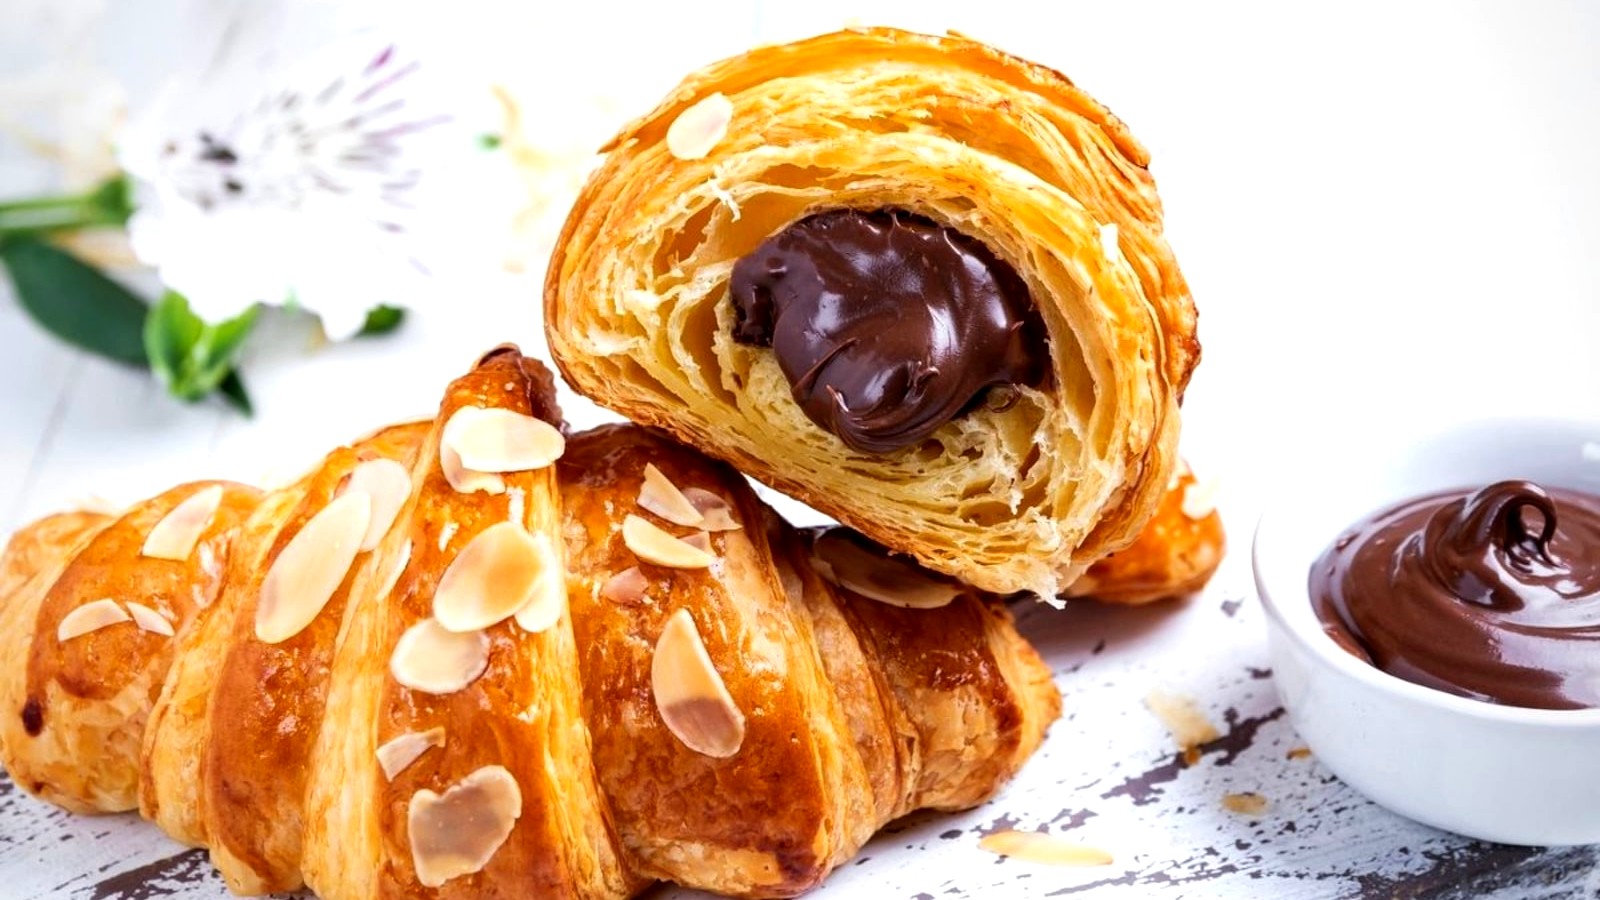 Image of Easy Almond Paste and Chocolate Croissants